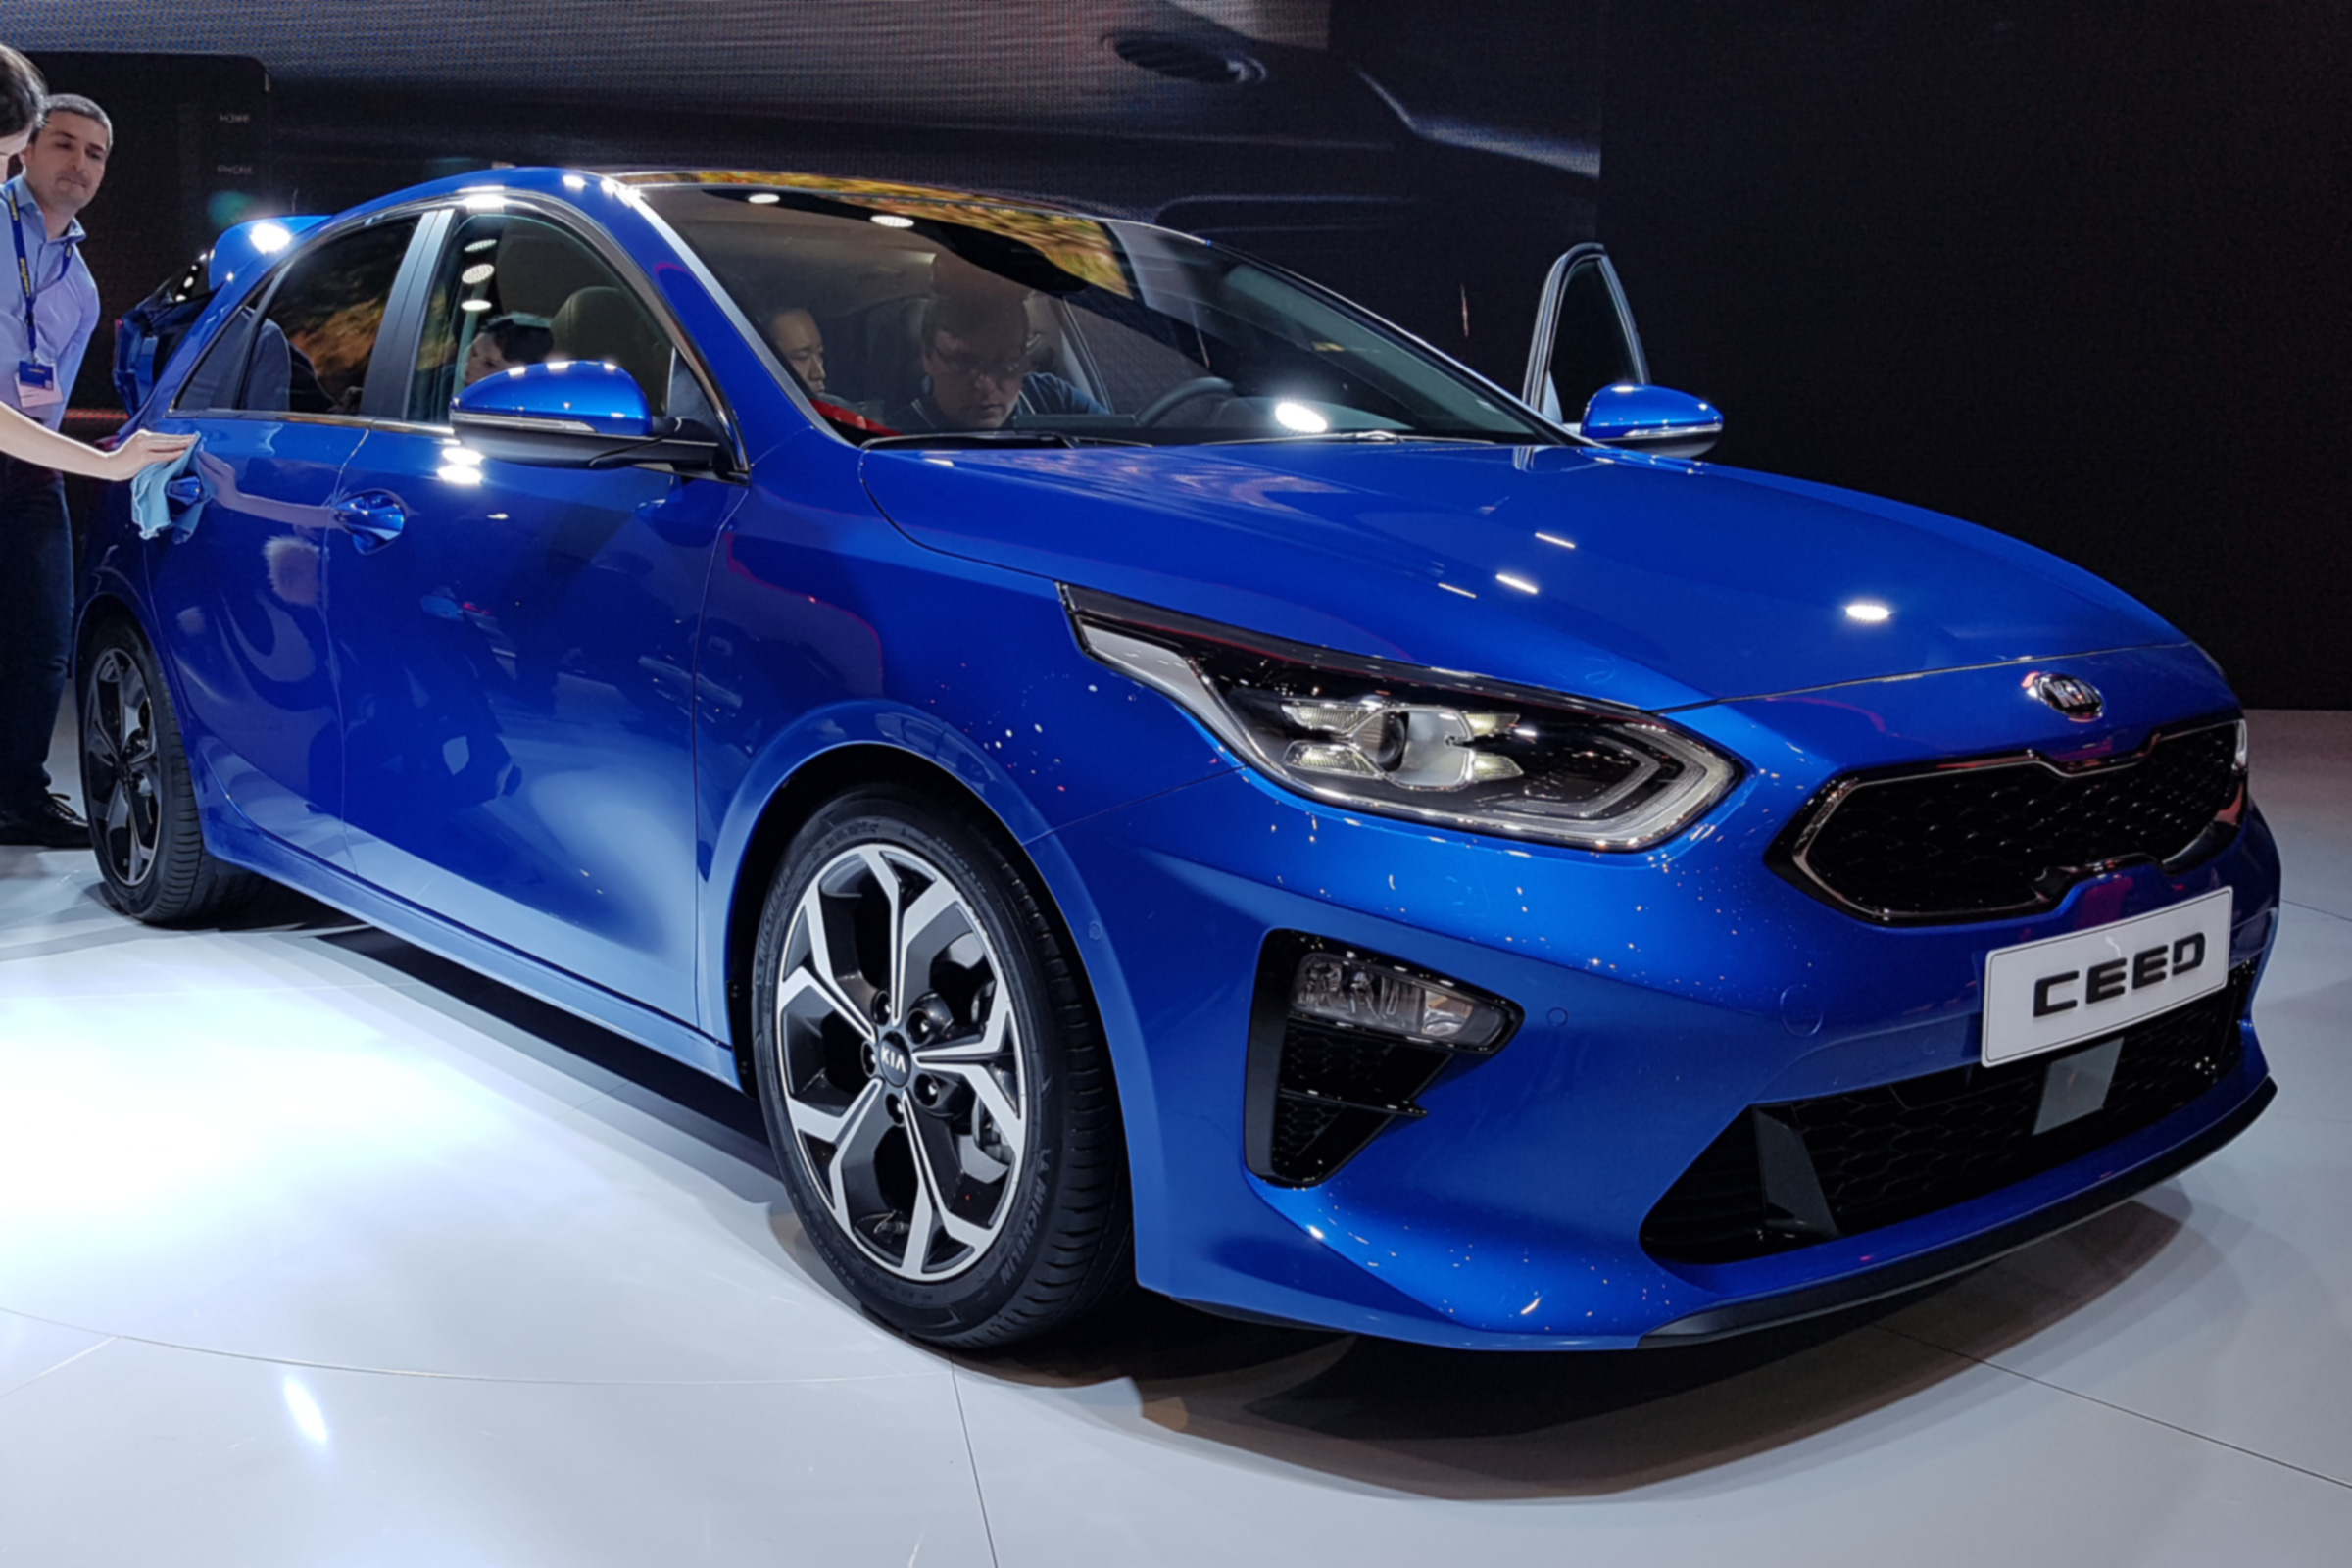 New Kia Ceed prices and specs: on sale now from £18,295 